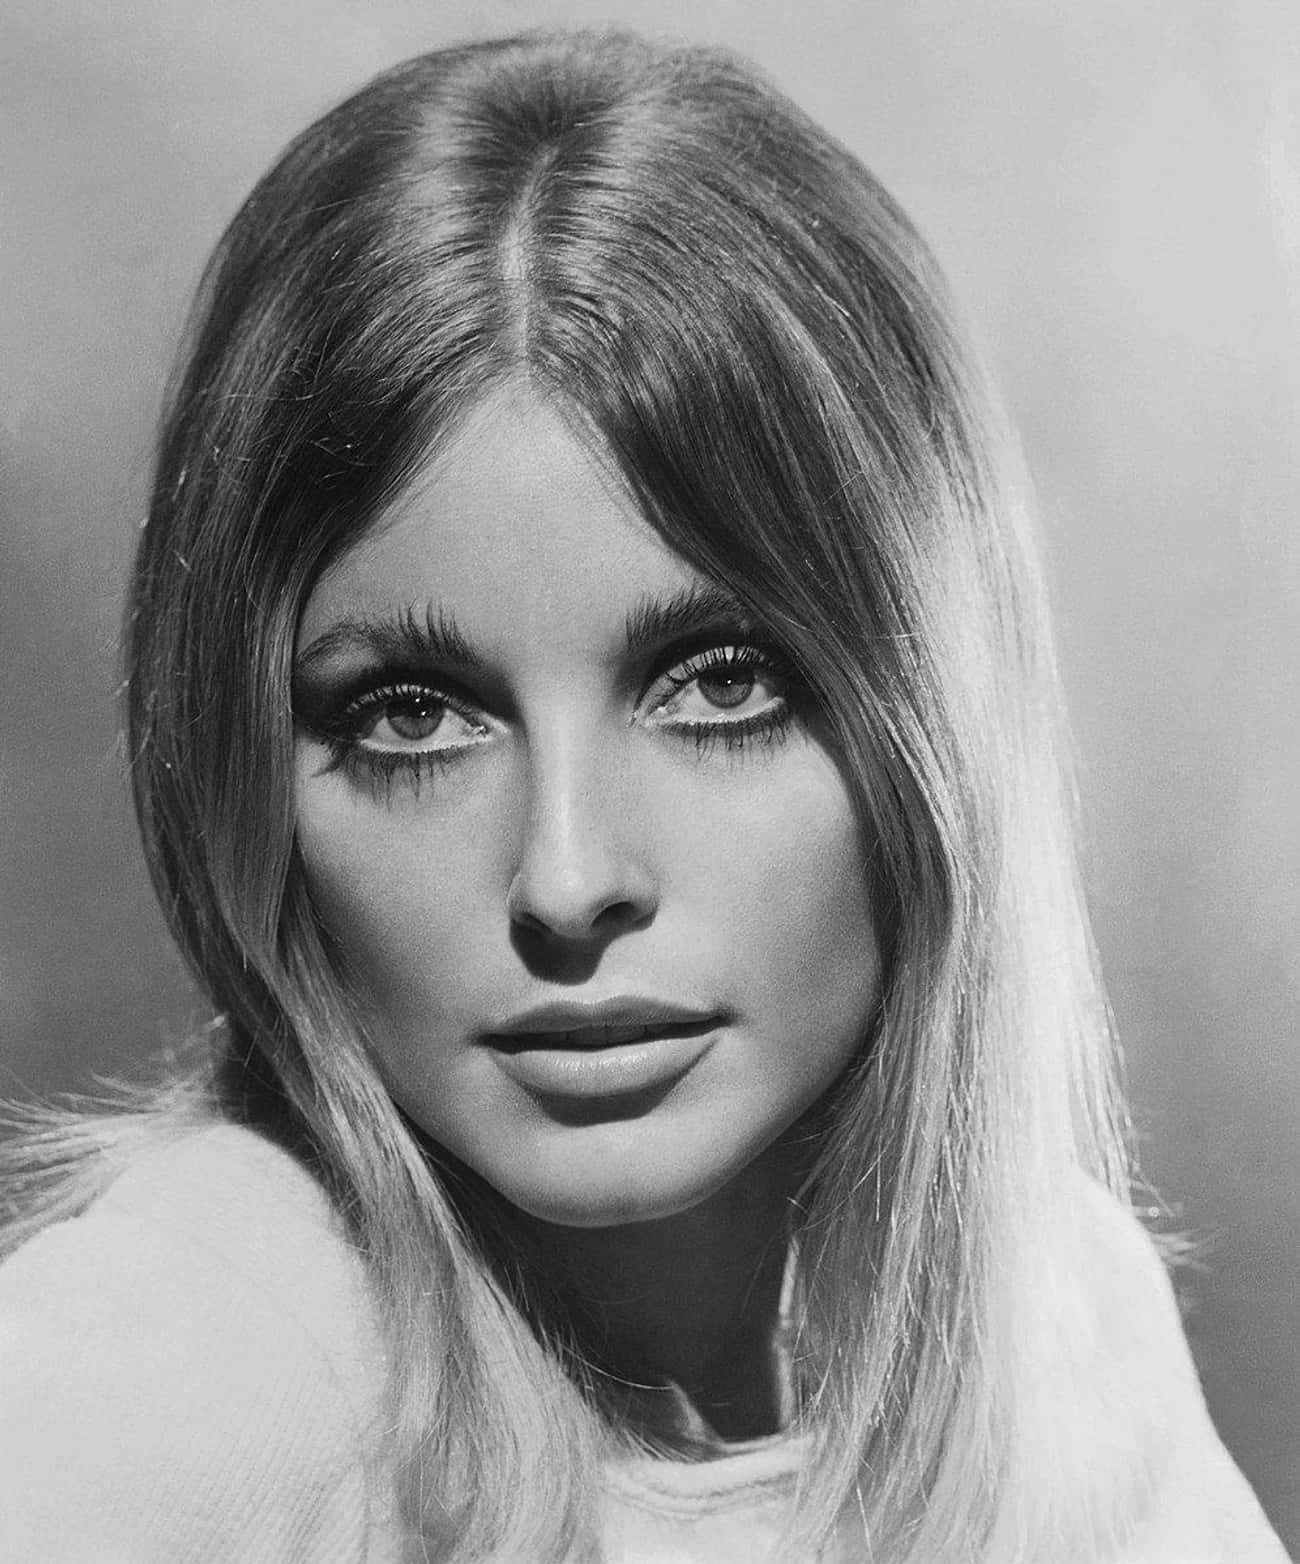 Sharon Tate Was Brutally Murdered When She Was Nine Months Pregnant